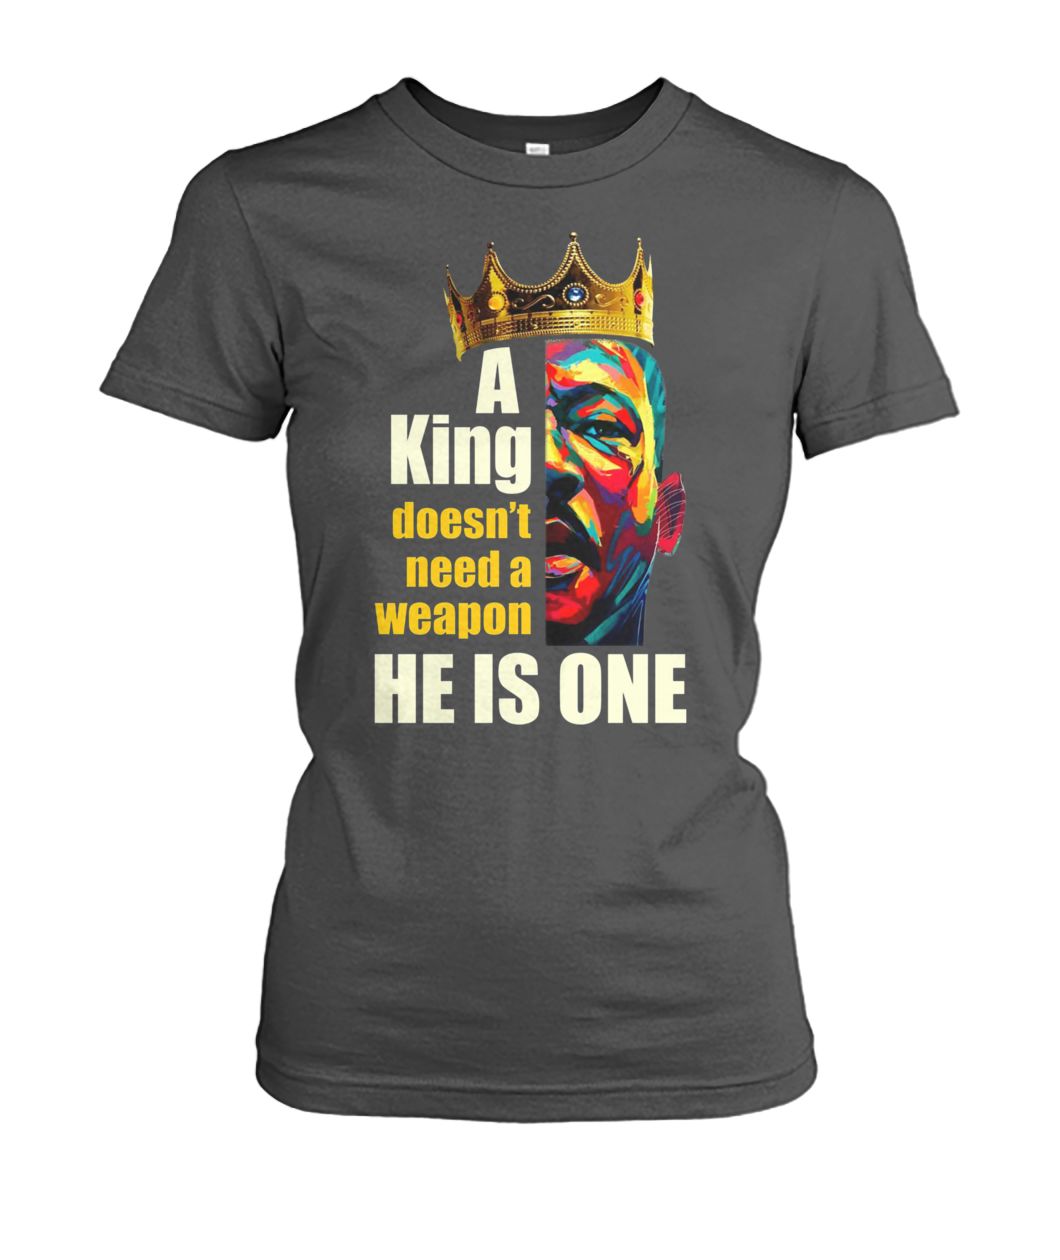 Martin luther king a king doesn't need a weapon he is one women's crew tee